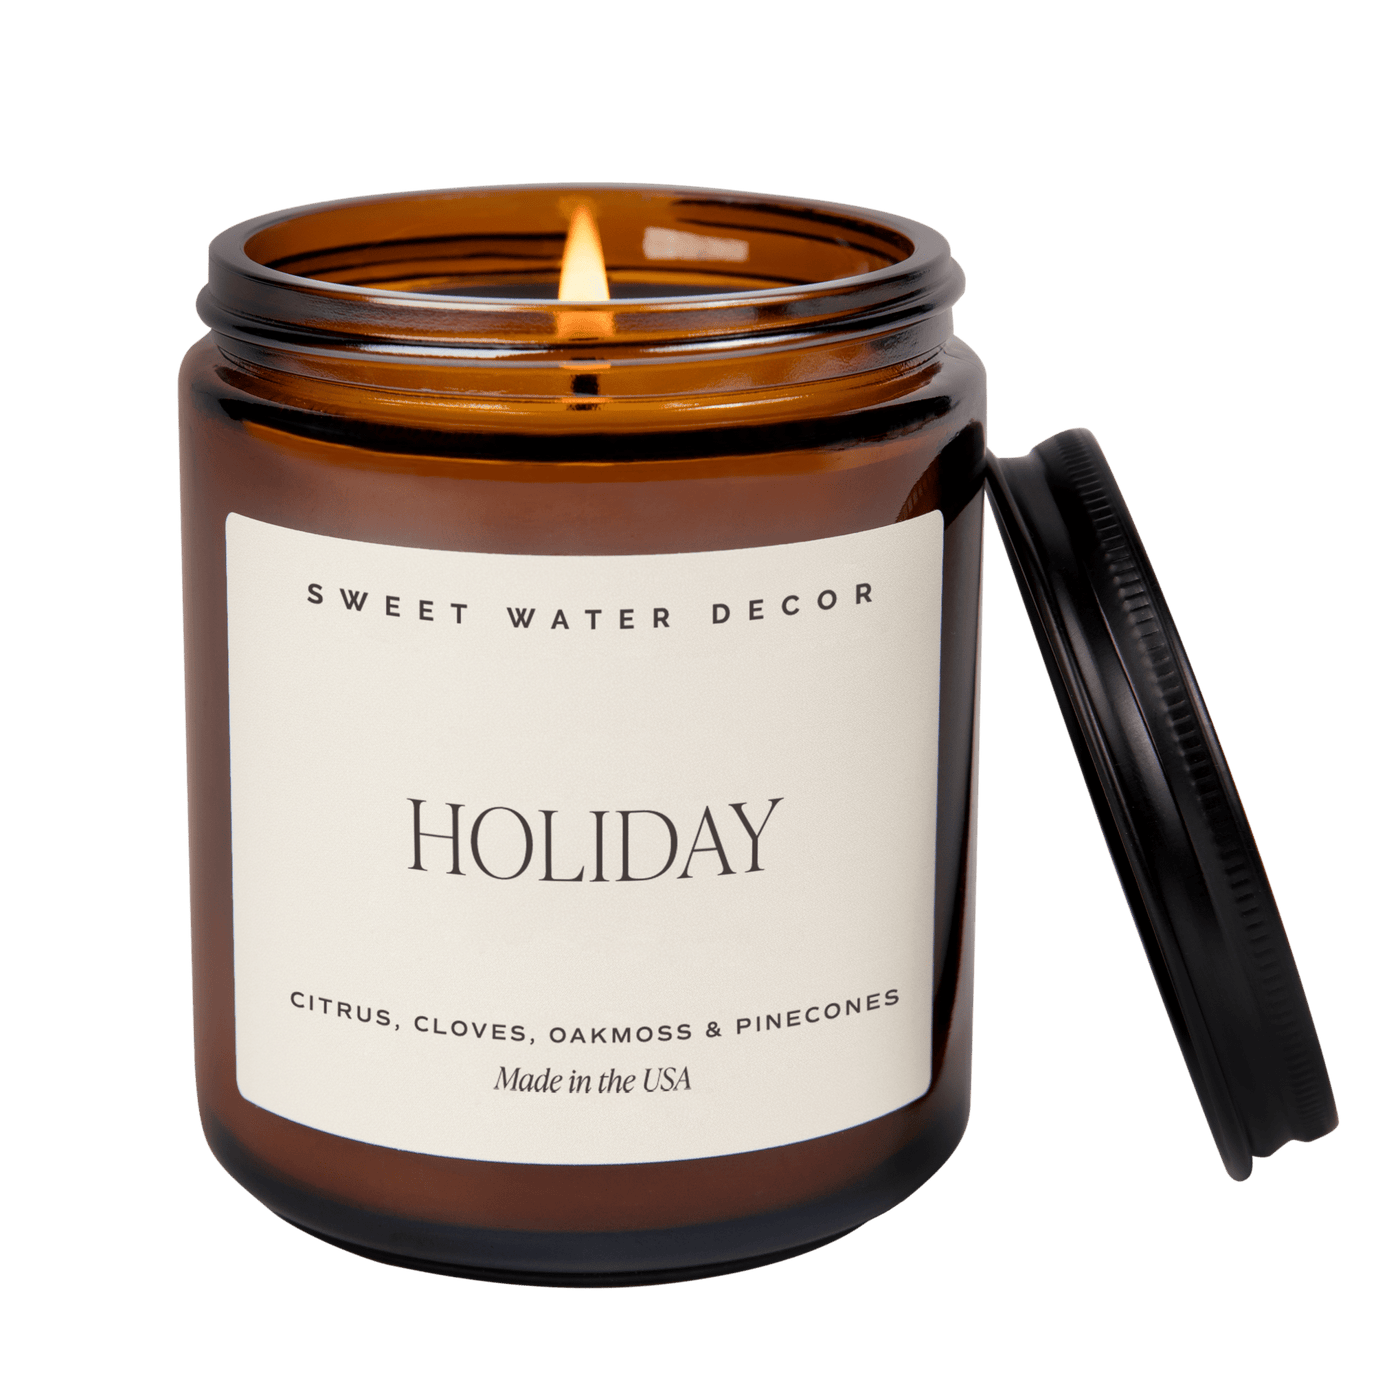 Holiday Soy Candle - Amber Jar - 9 oz - Sweet Water Decor - Candles